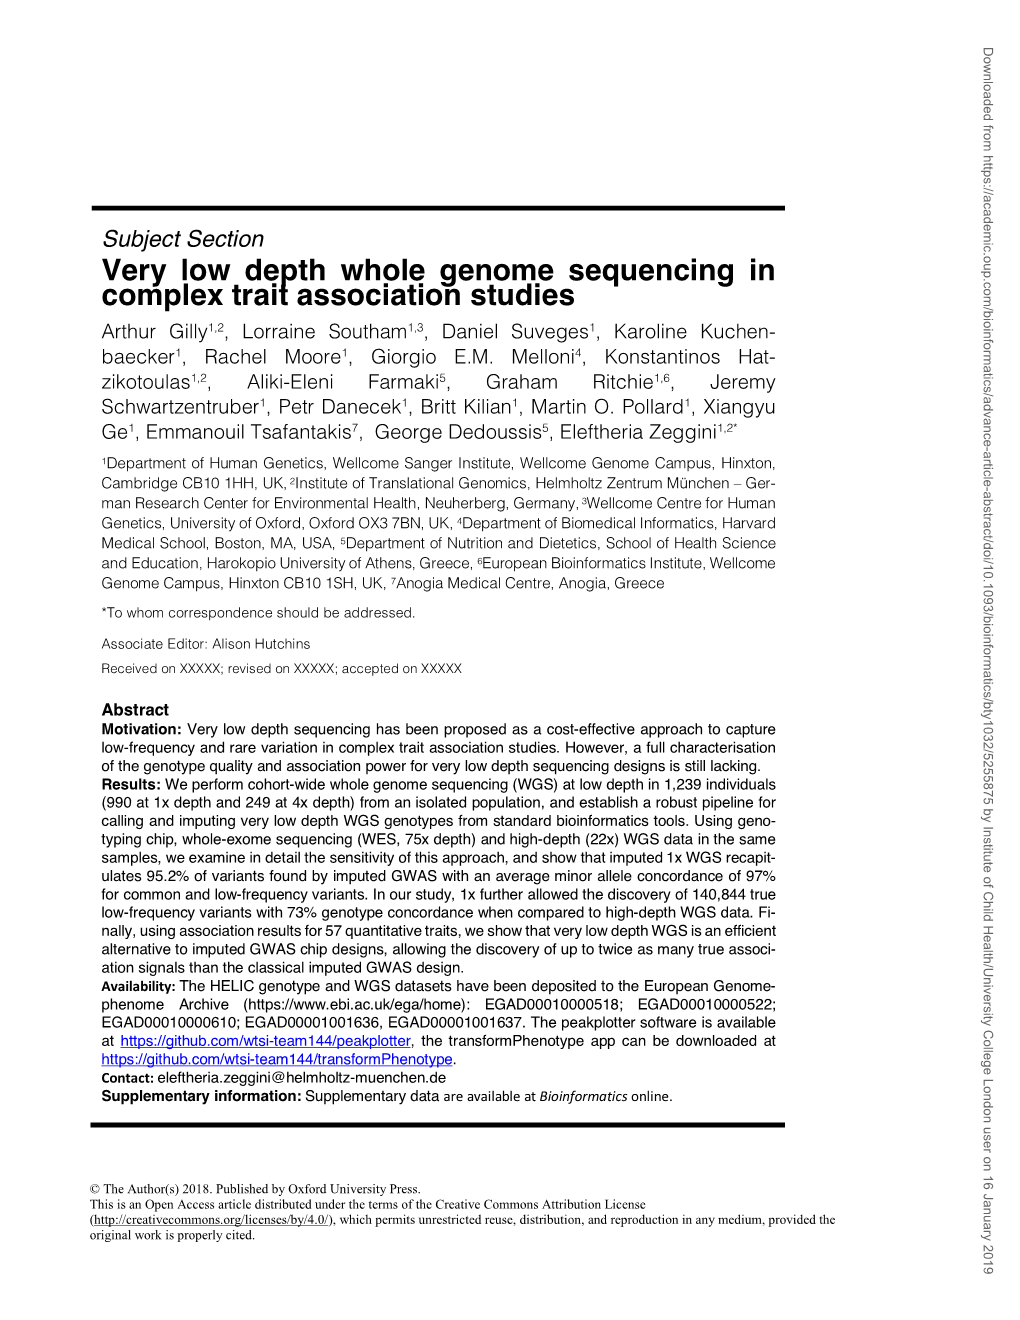 Very Low Depth Whole Genome Sequencing in Complex Trait Association Studies